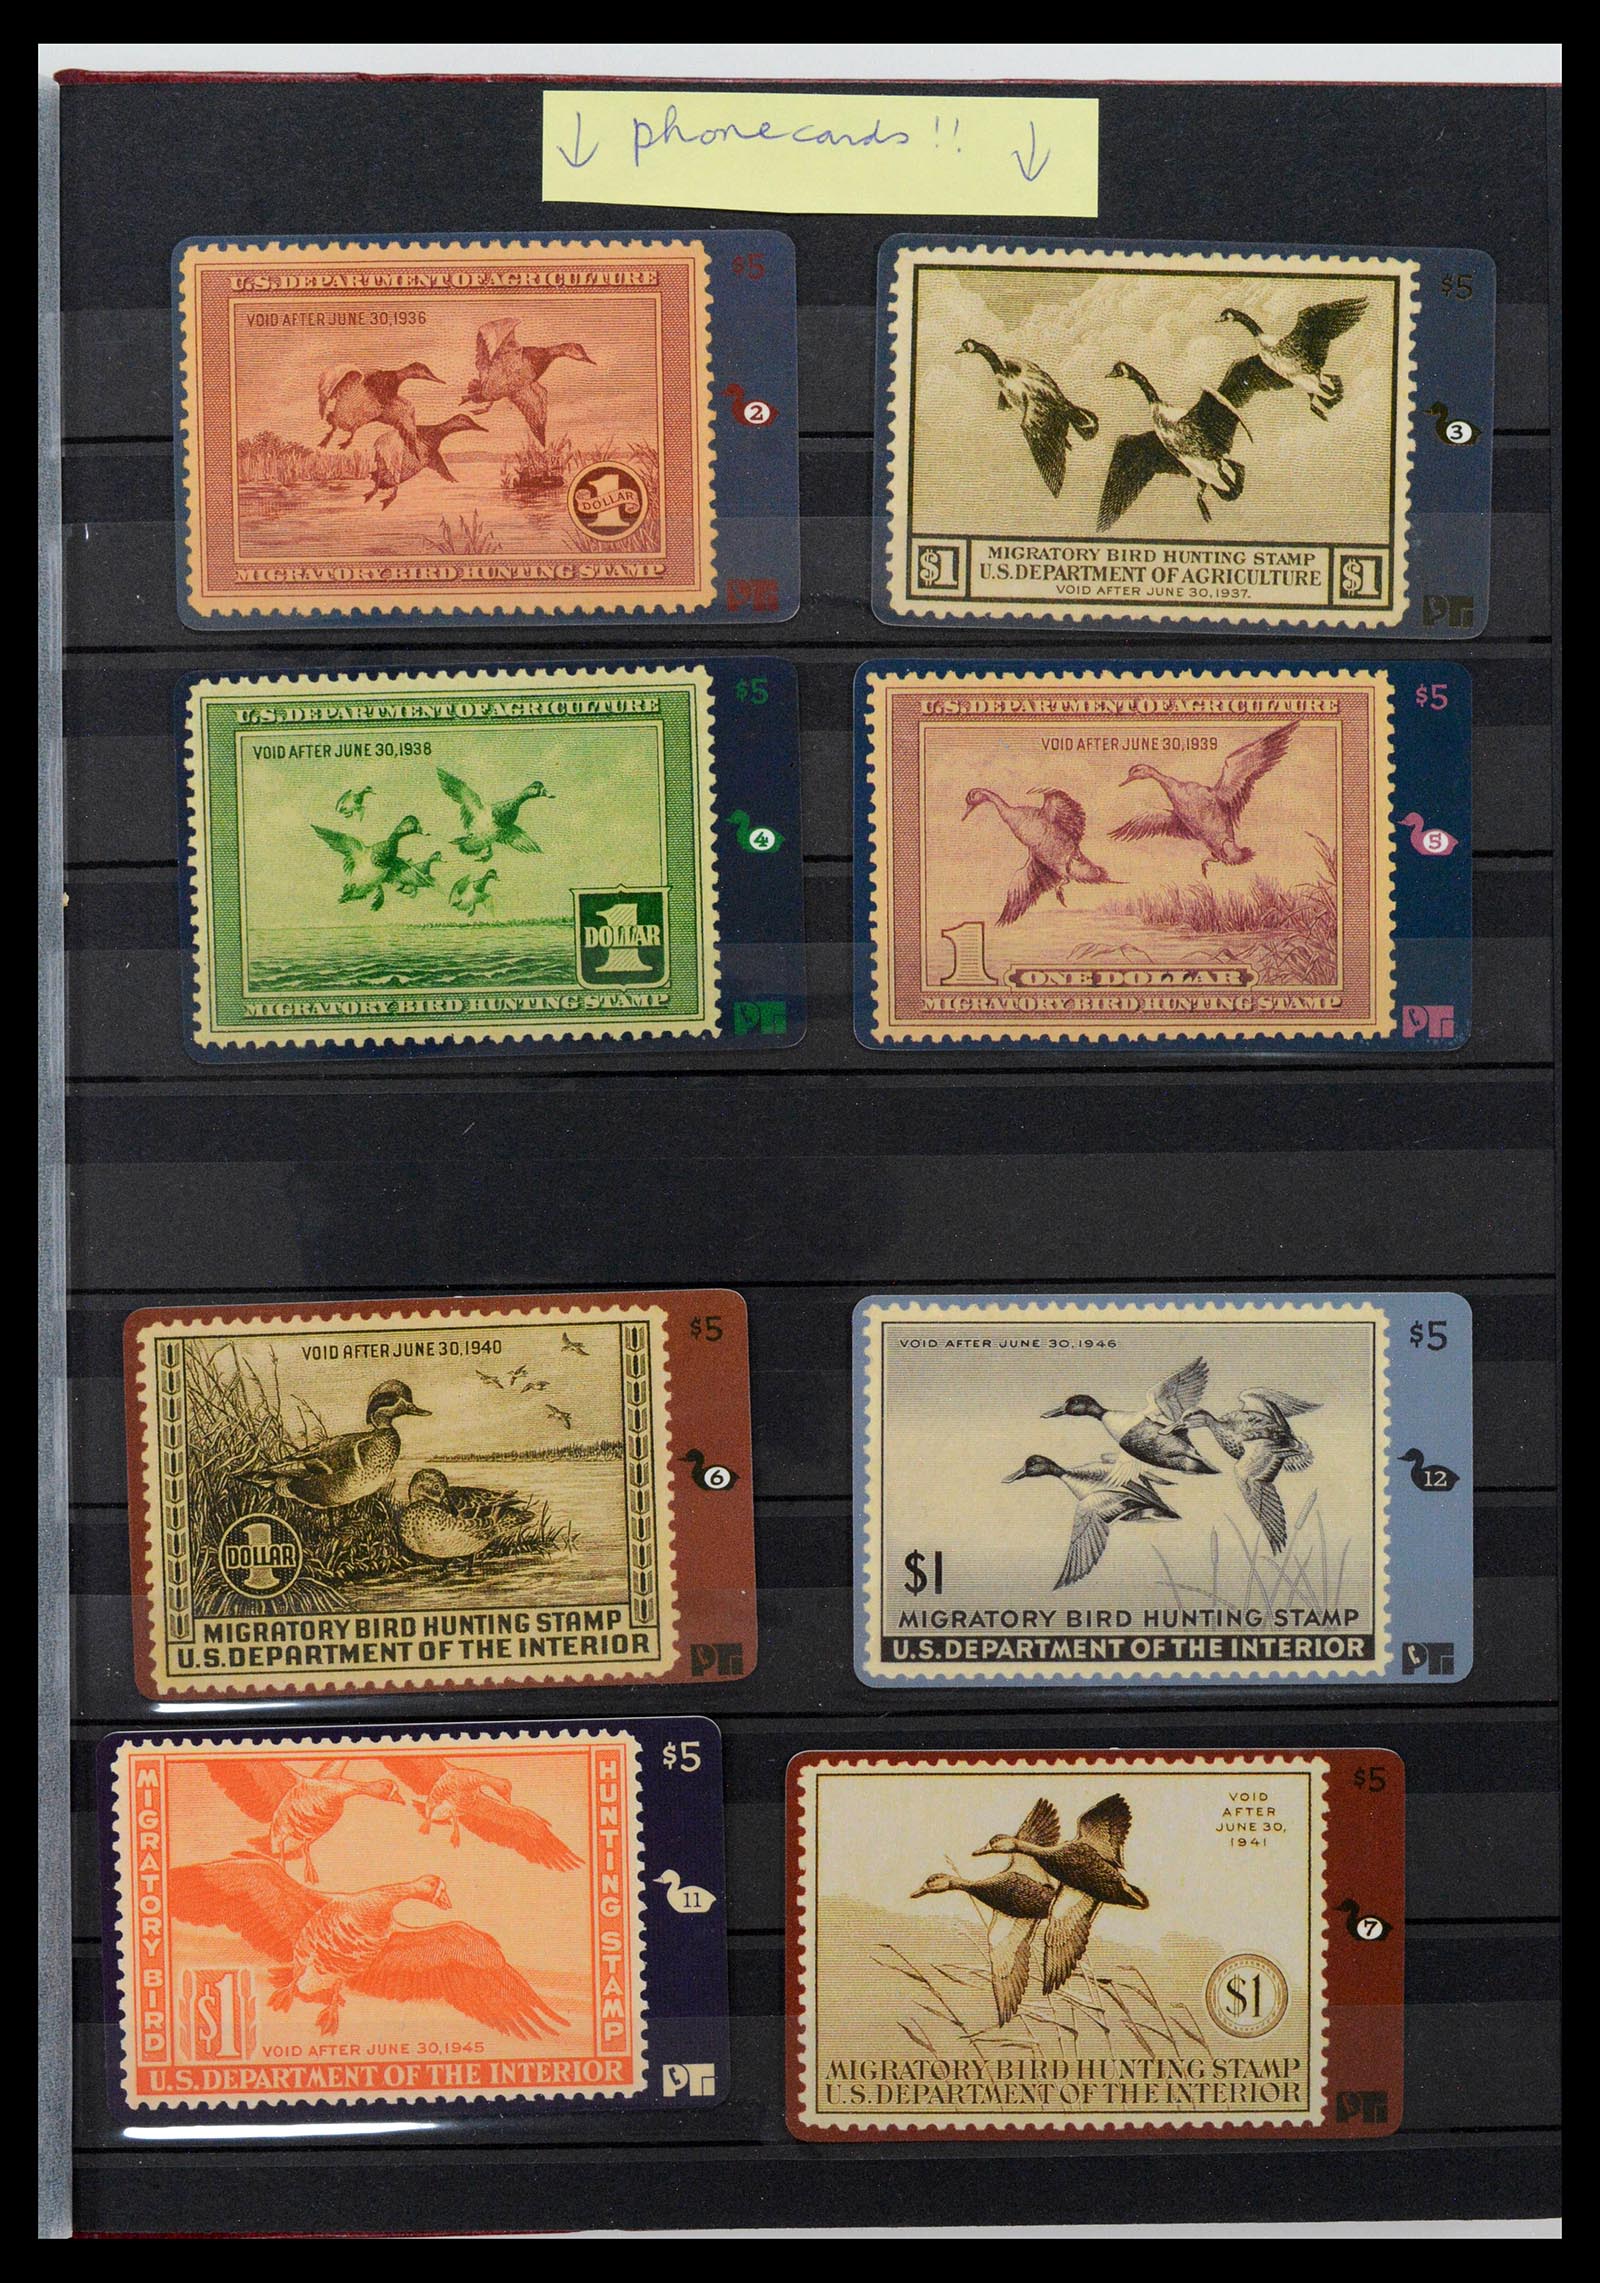 39426 0019 - Stamp collection 39426 USA duckstamps 1934-2007.